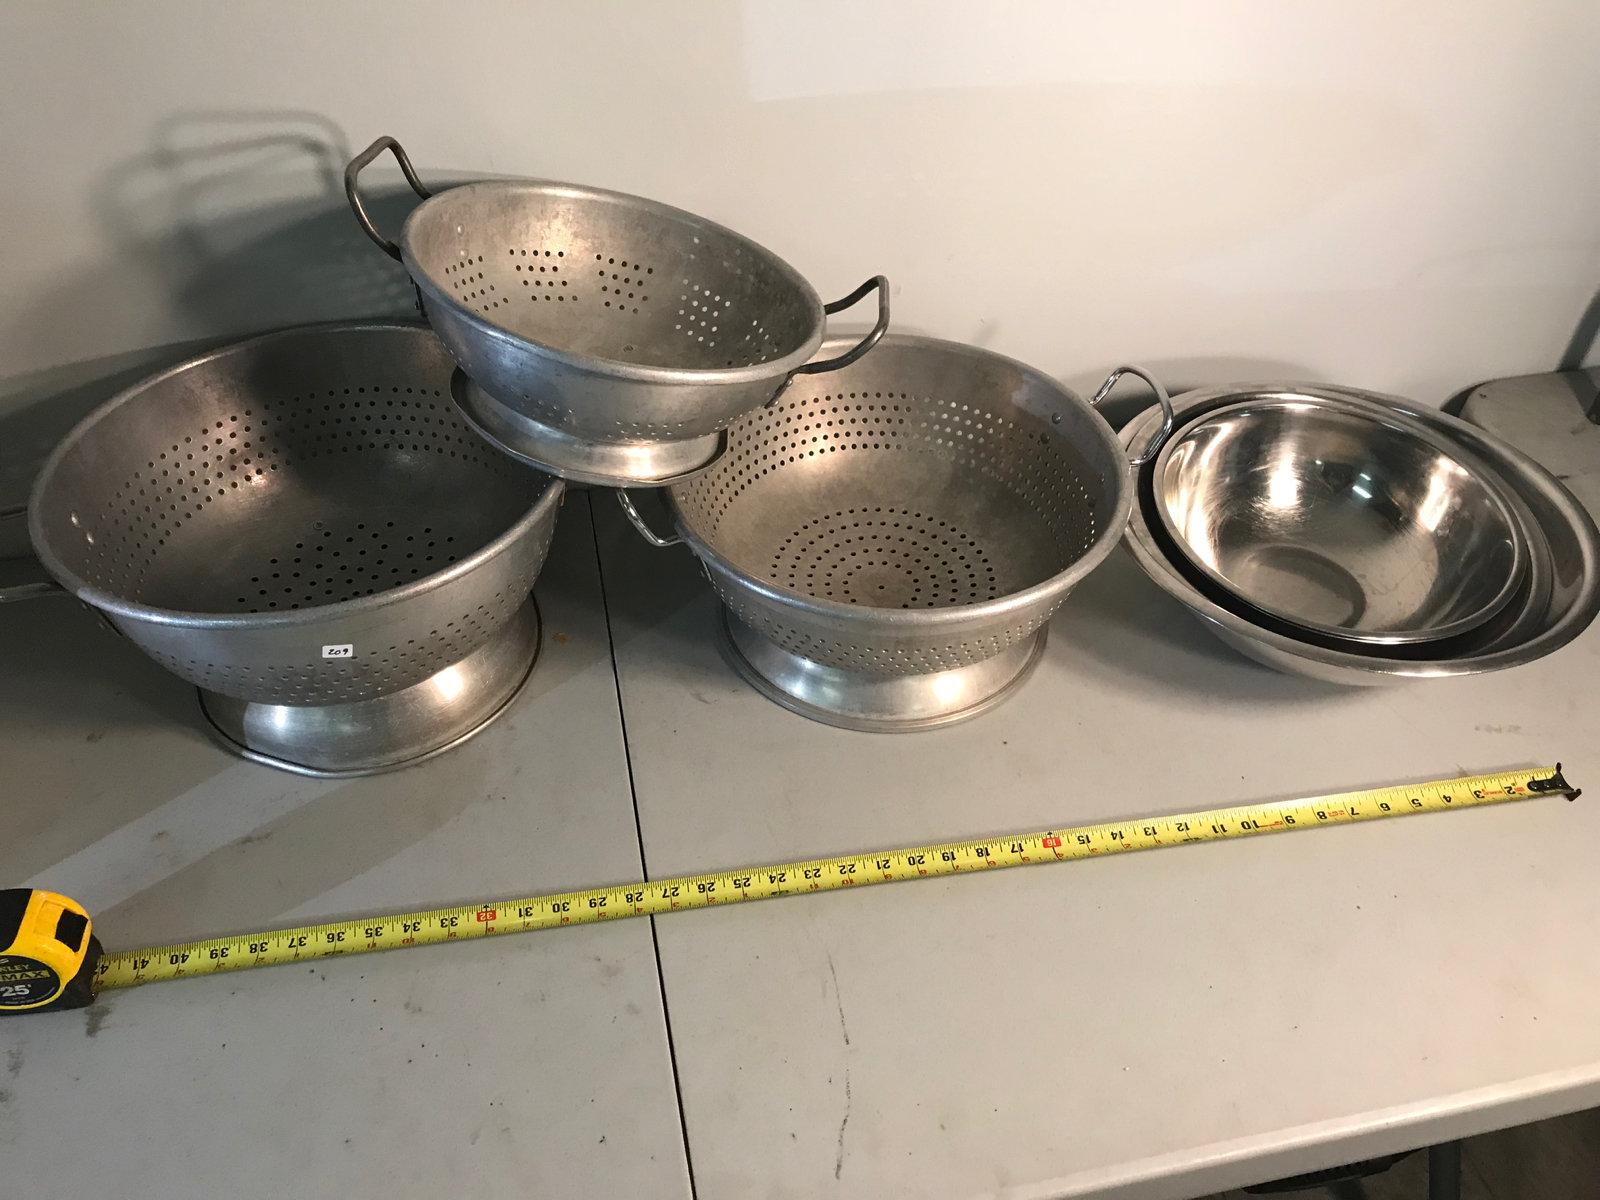 Stainless mixing bowls and aluminum colanders